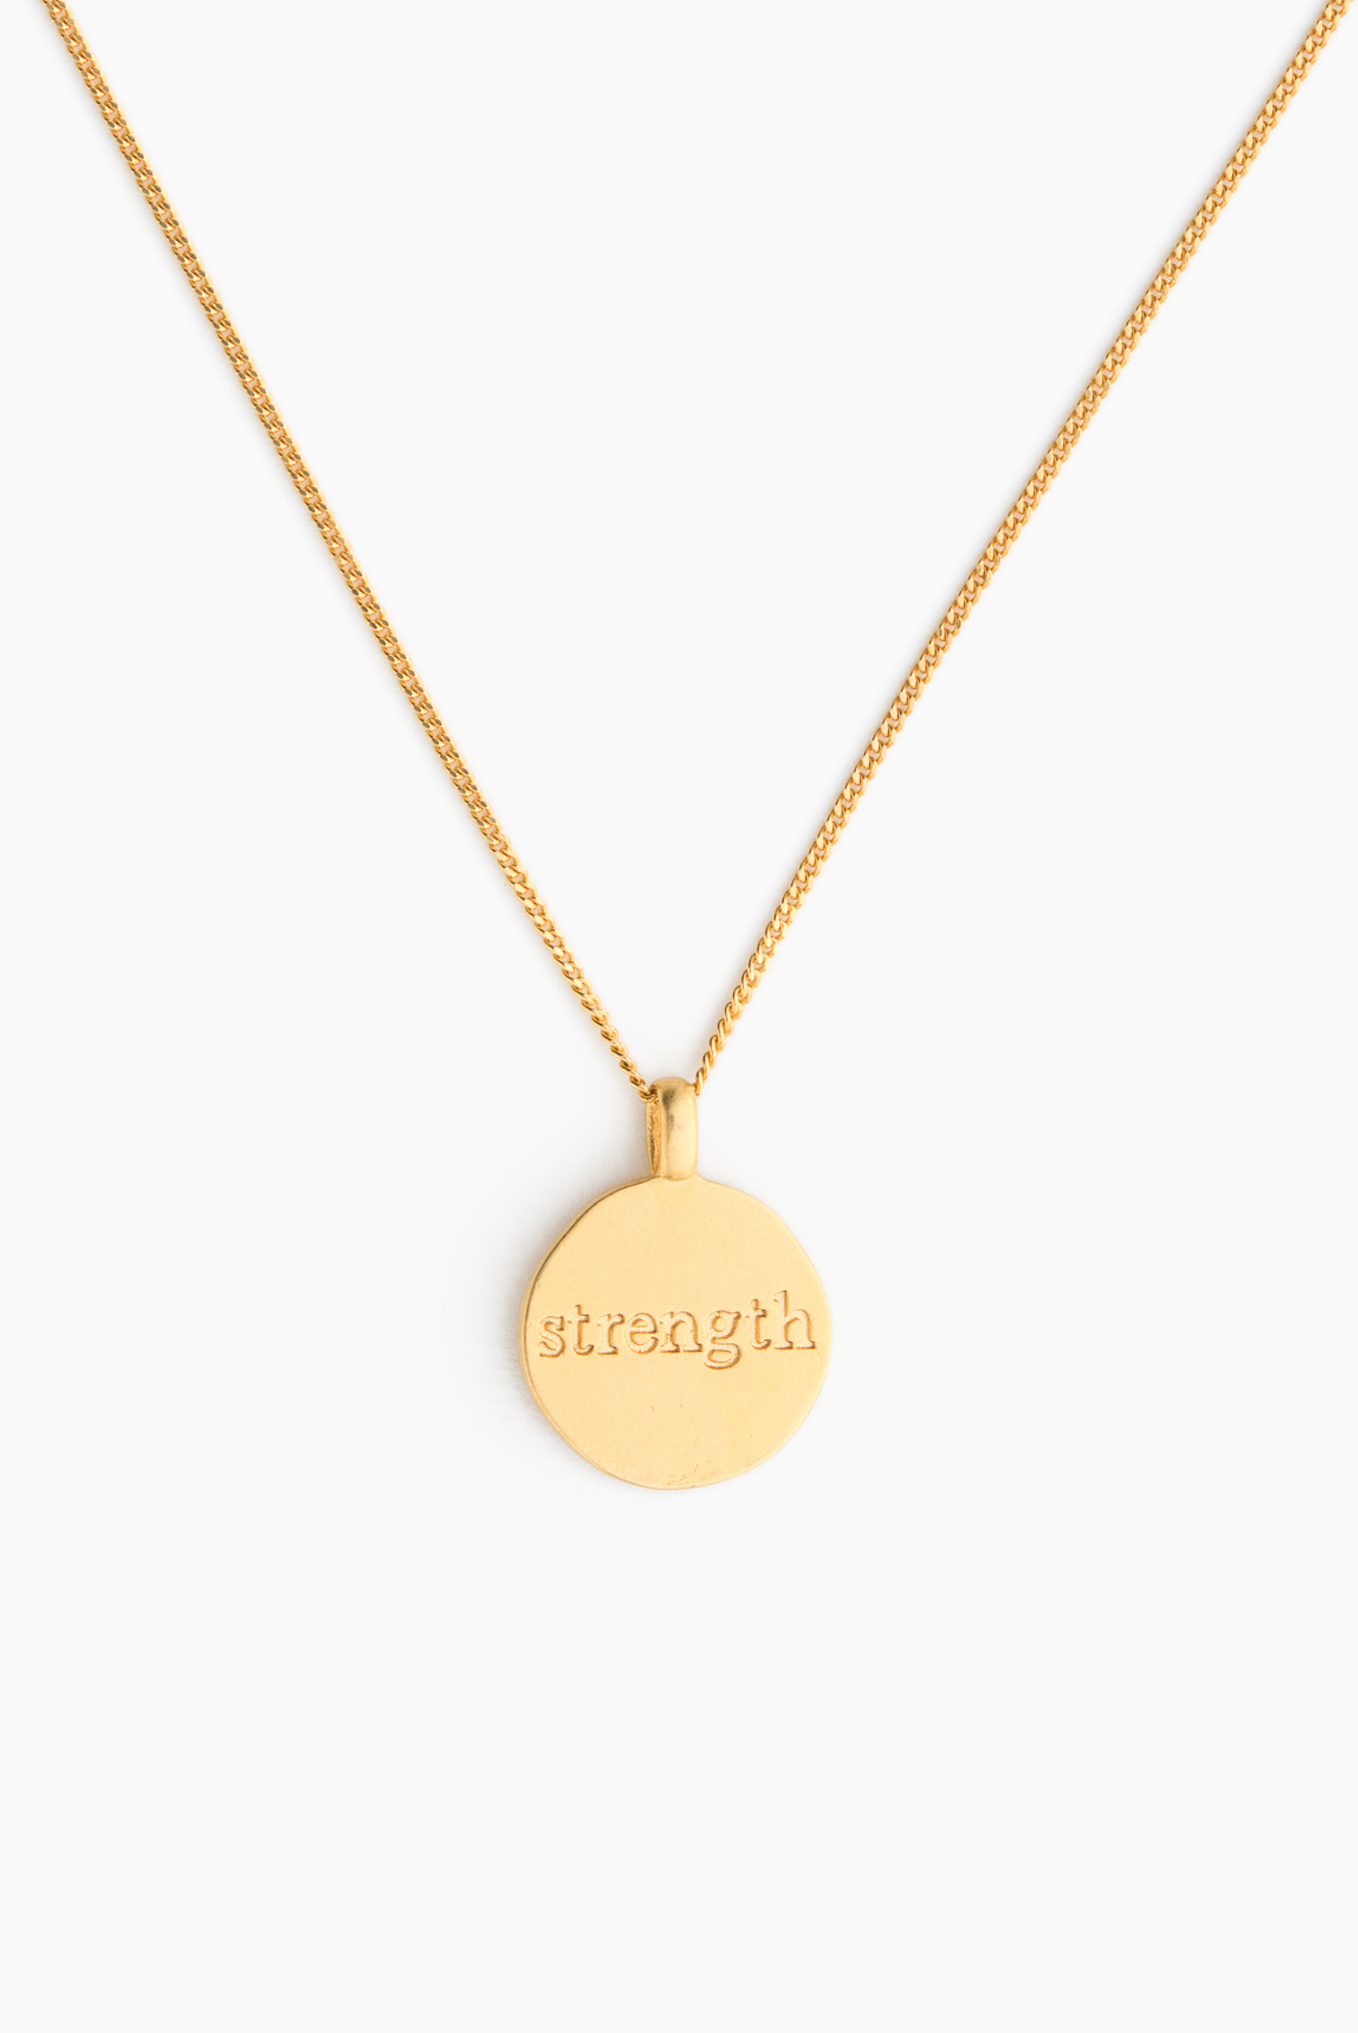 Necklace "Be Your Strength"